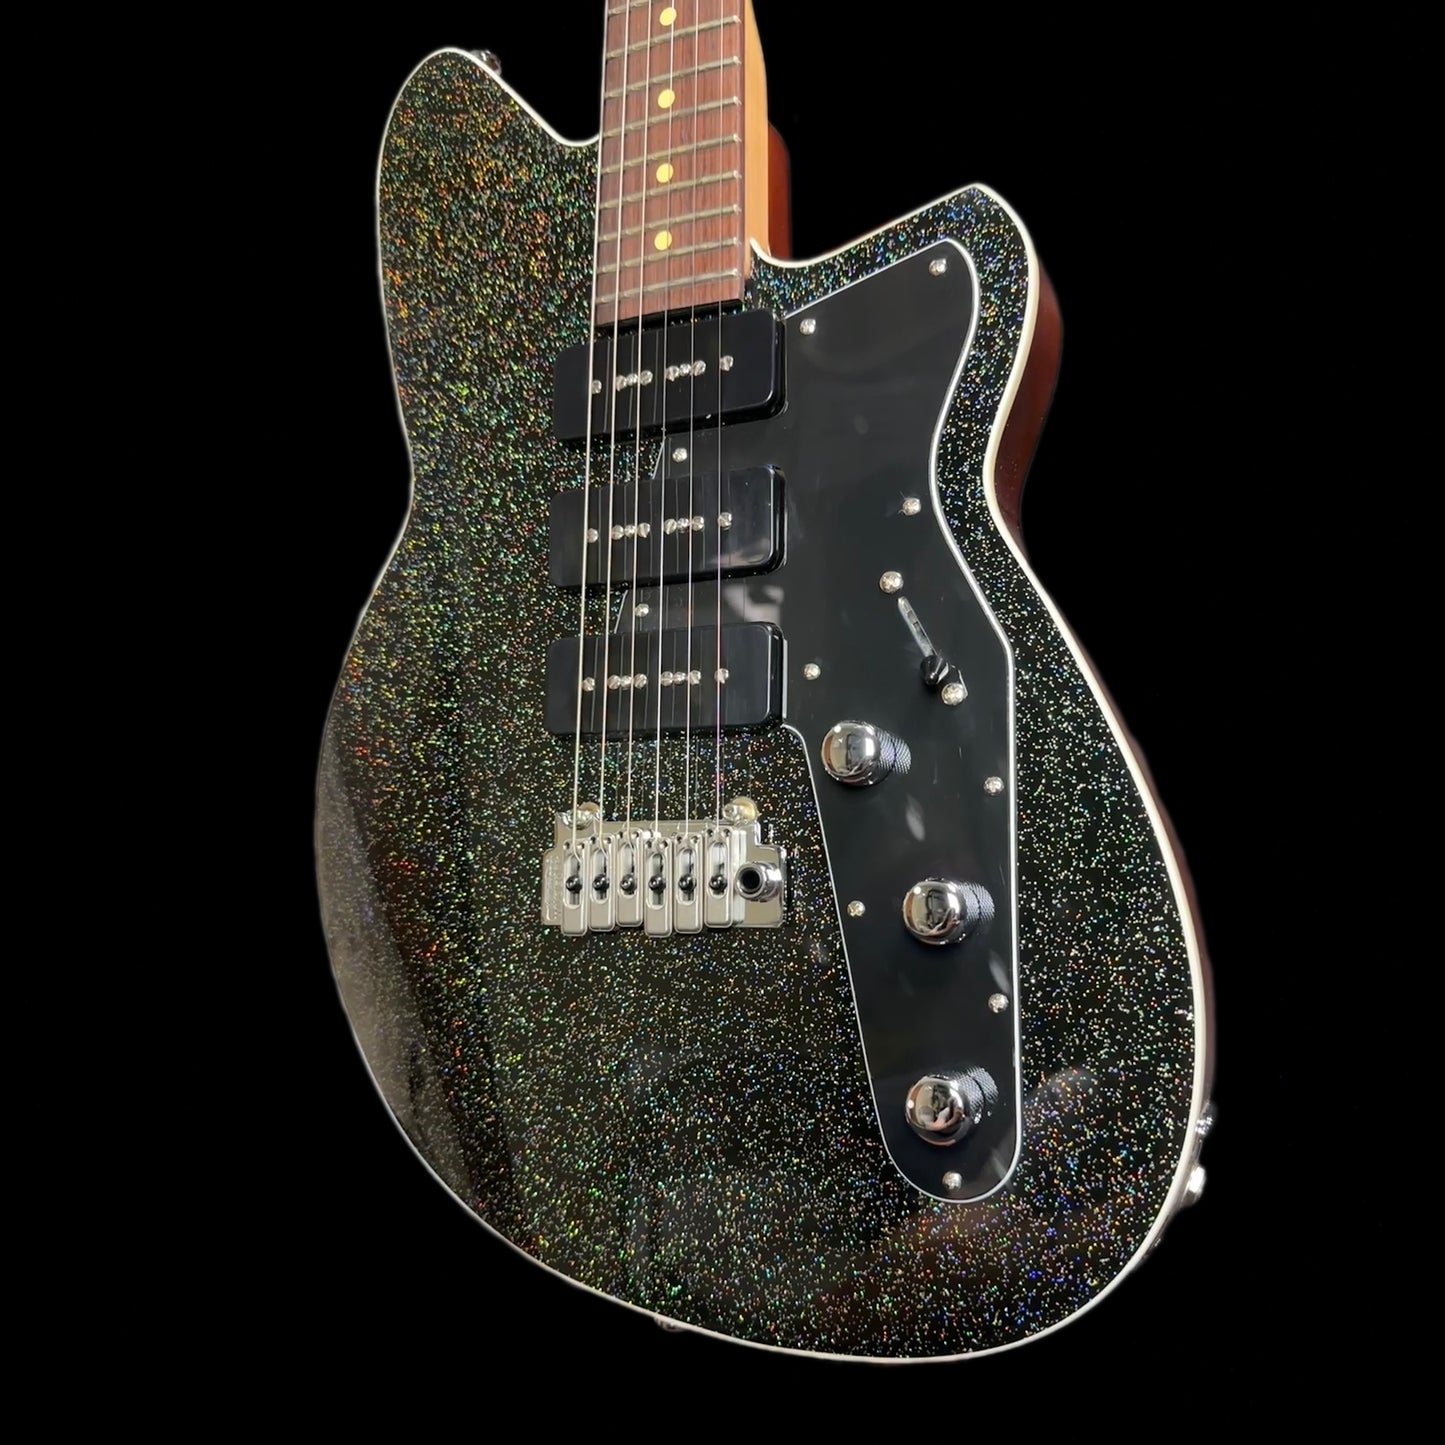 Side angle of Reverend Jetstream 390 Tone Shop Exclusive Rainbow Sparkle.